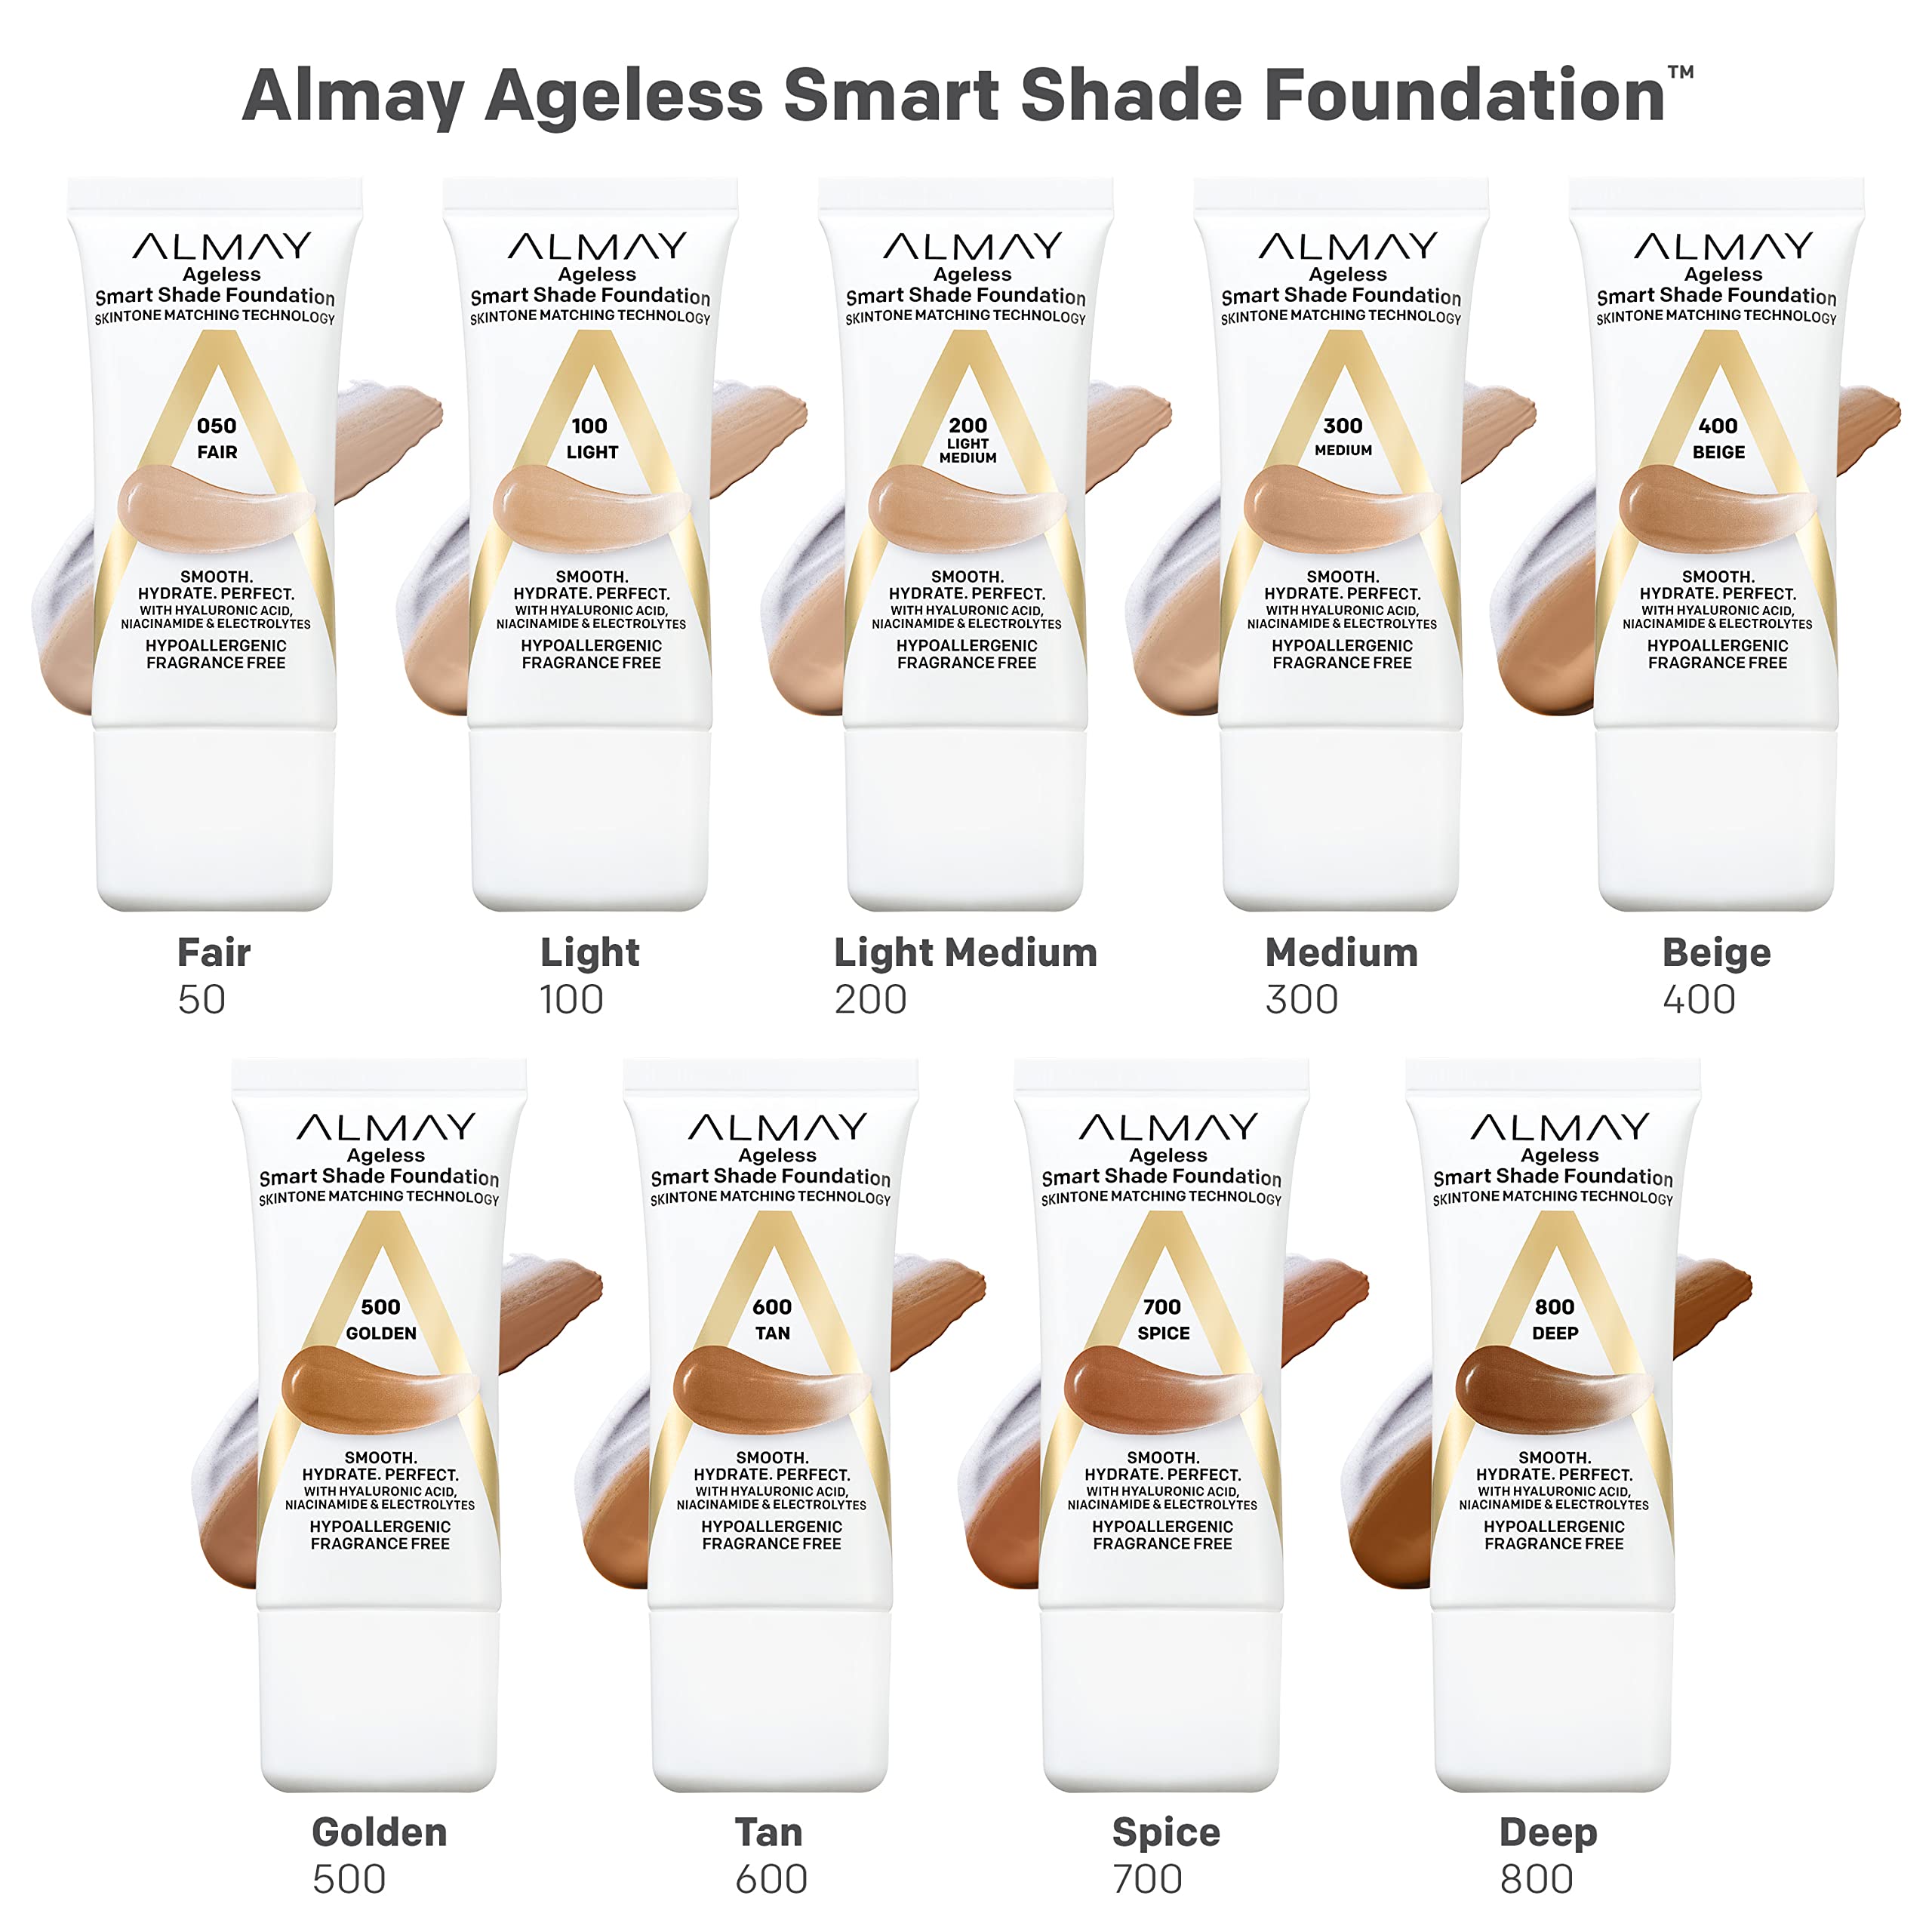 Anti-Aging Foundation by Almay, Smart Shade Face Makeup with Hyaluronic Acid, Niacinamide, Vitamin C & E, Hypoallergenic-Fragrance Free, 300 Medium, 1 Fl Oz (Pack of 1)